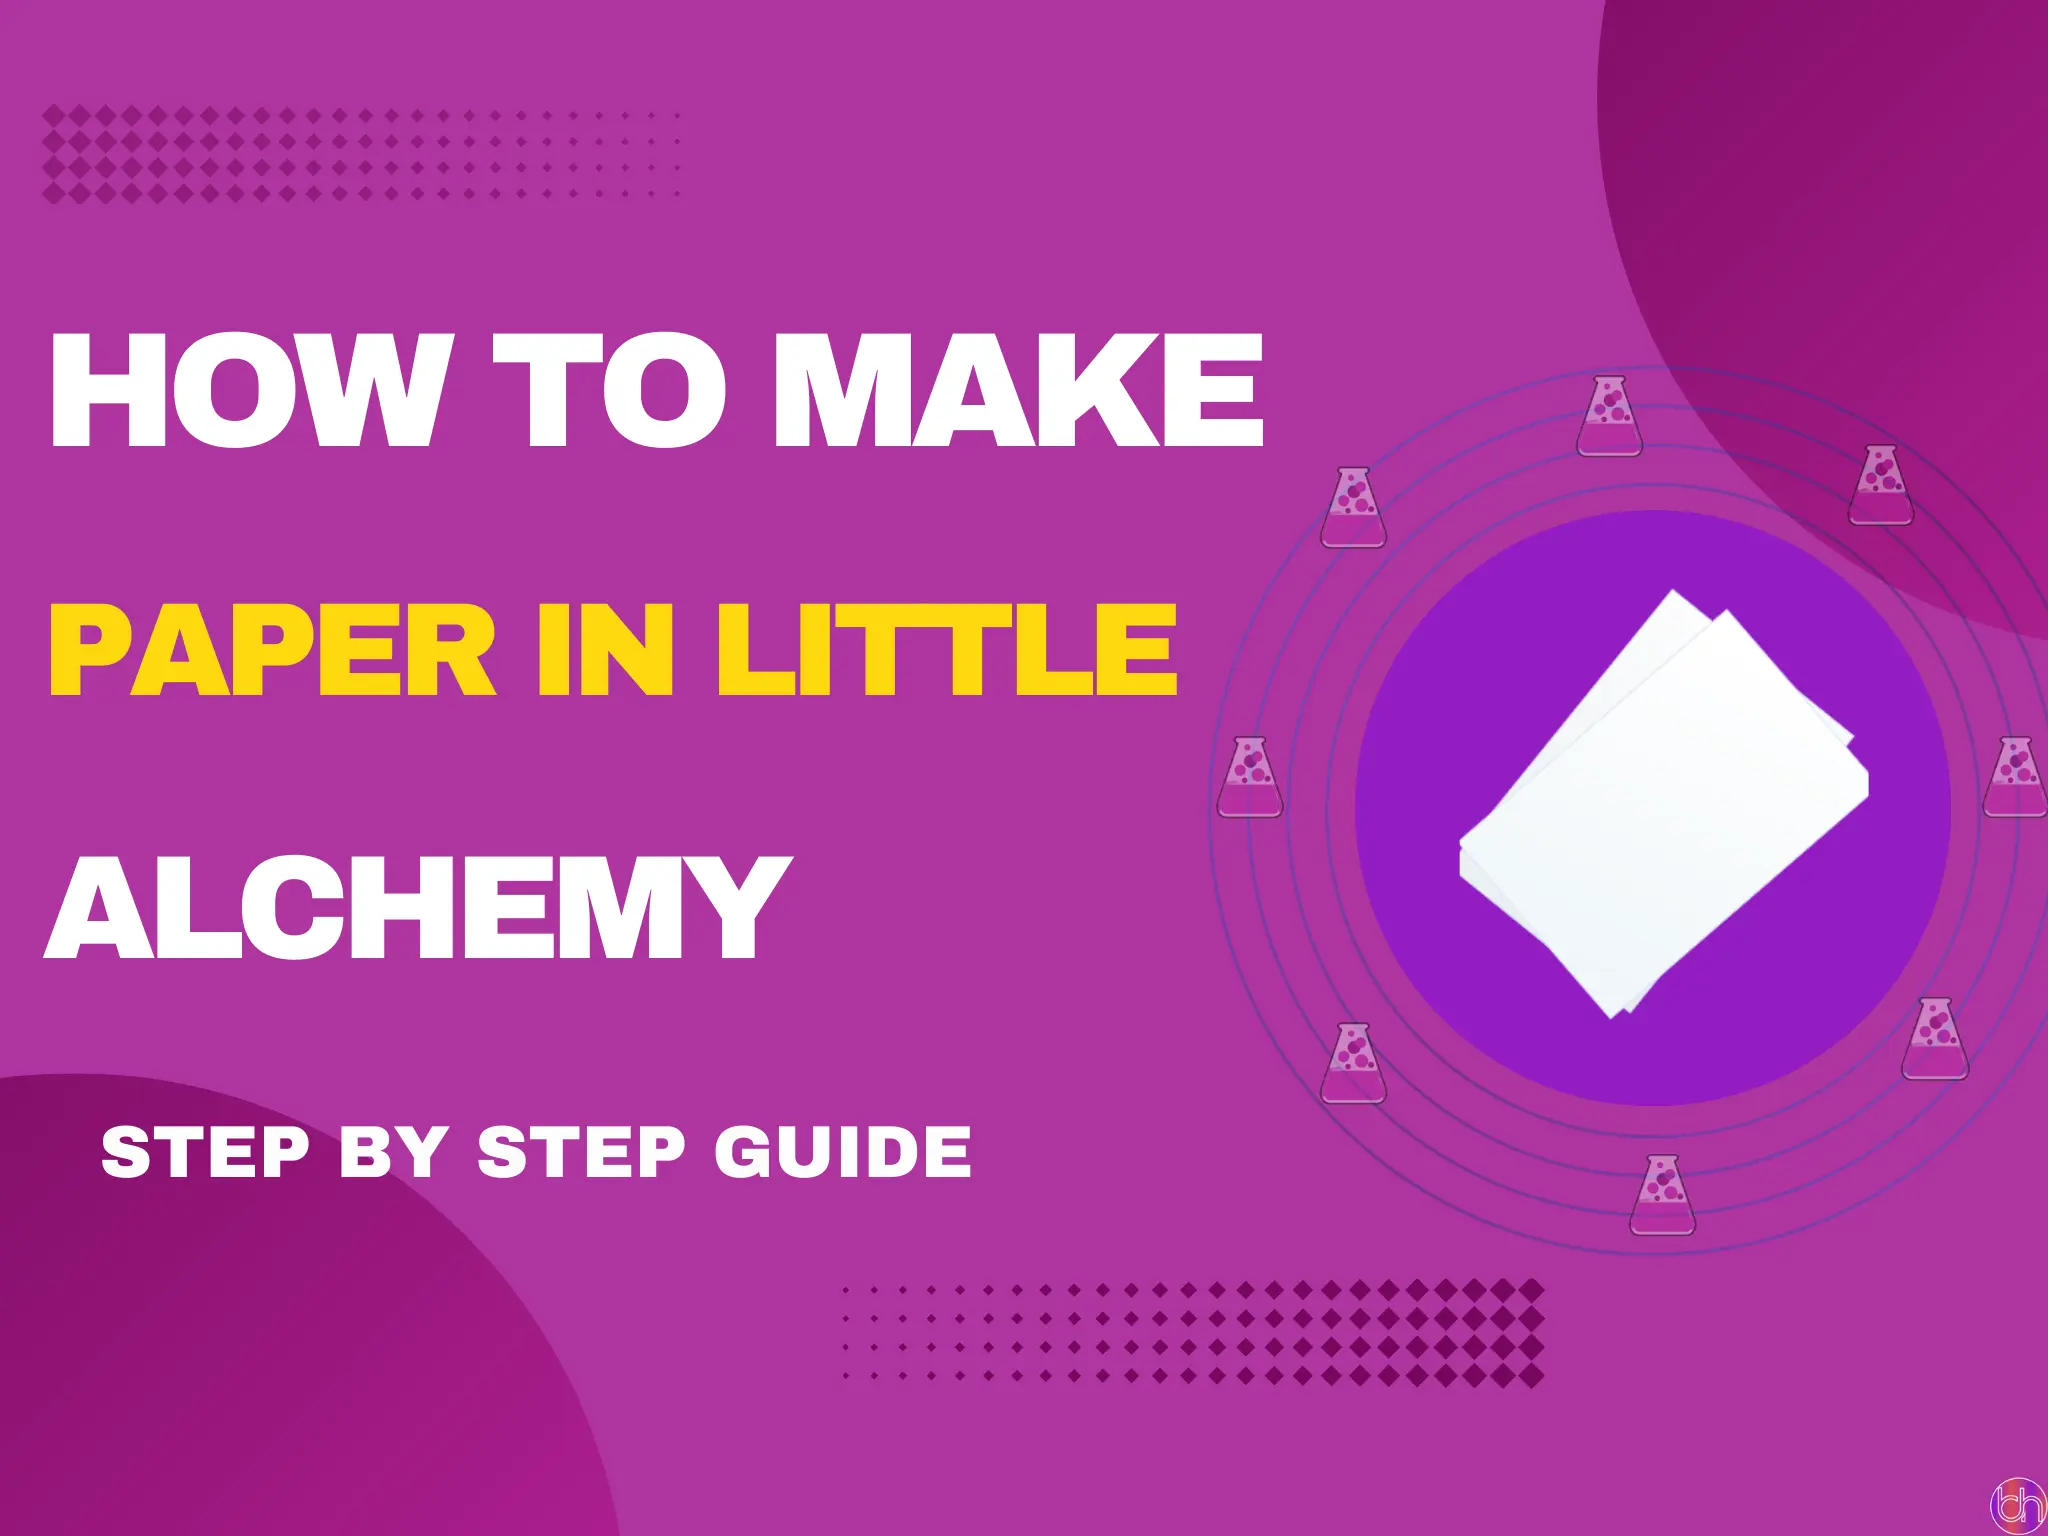 How to make Paper in Little Alchemy